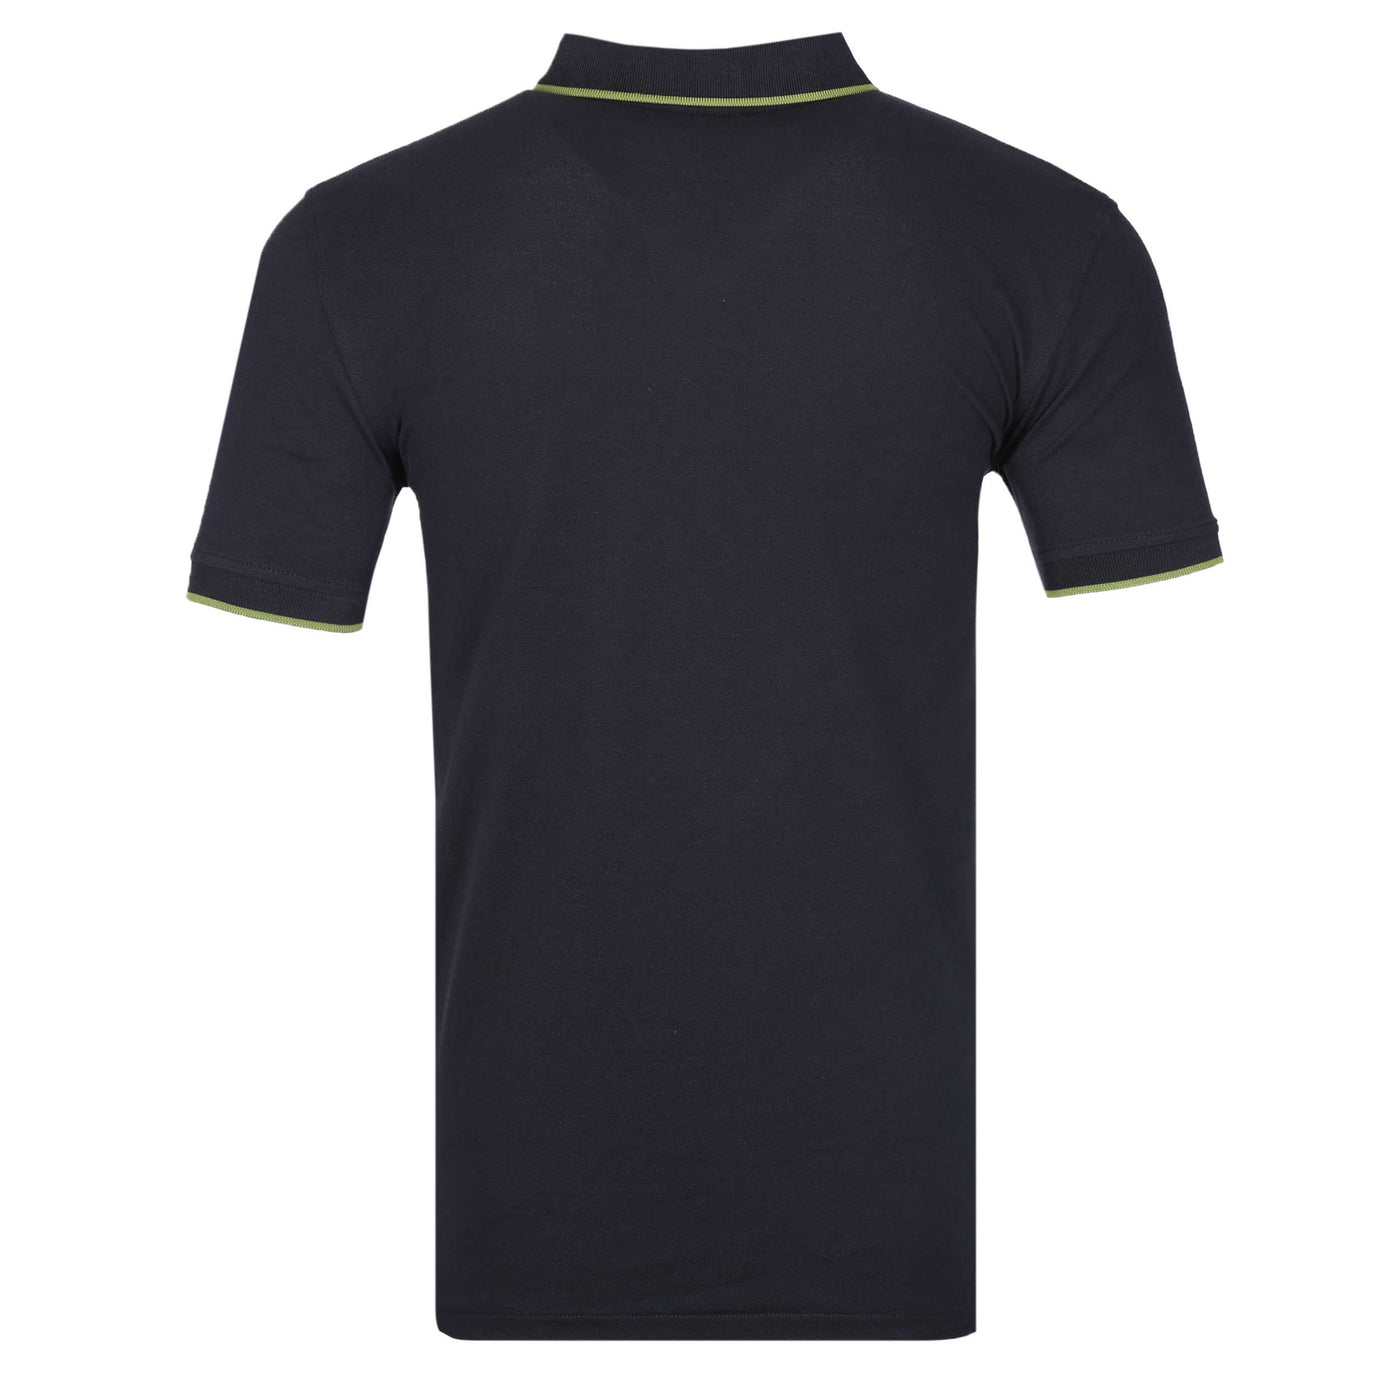 Paul Smith Zeb Badge Slim Fit Polo Shirt in Navy